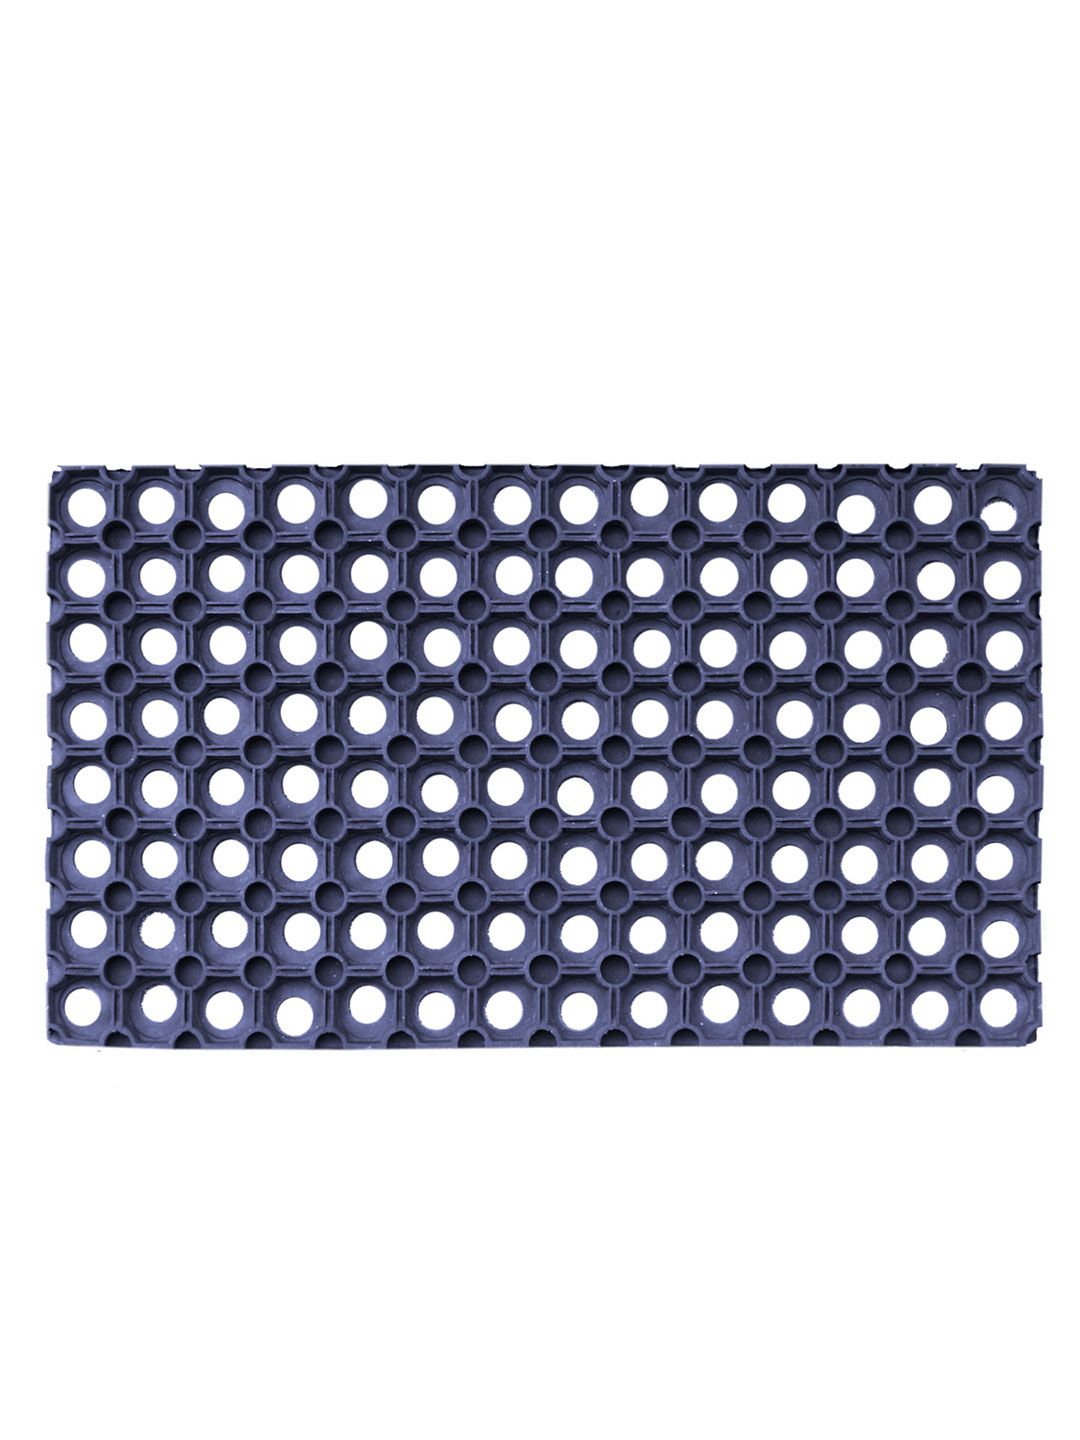 LUXEHOME INTERNATIONAL Navy Blue Solid Rubber Doormats Price in India